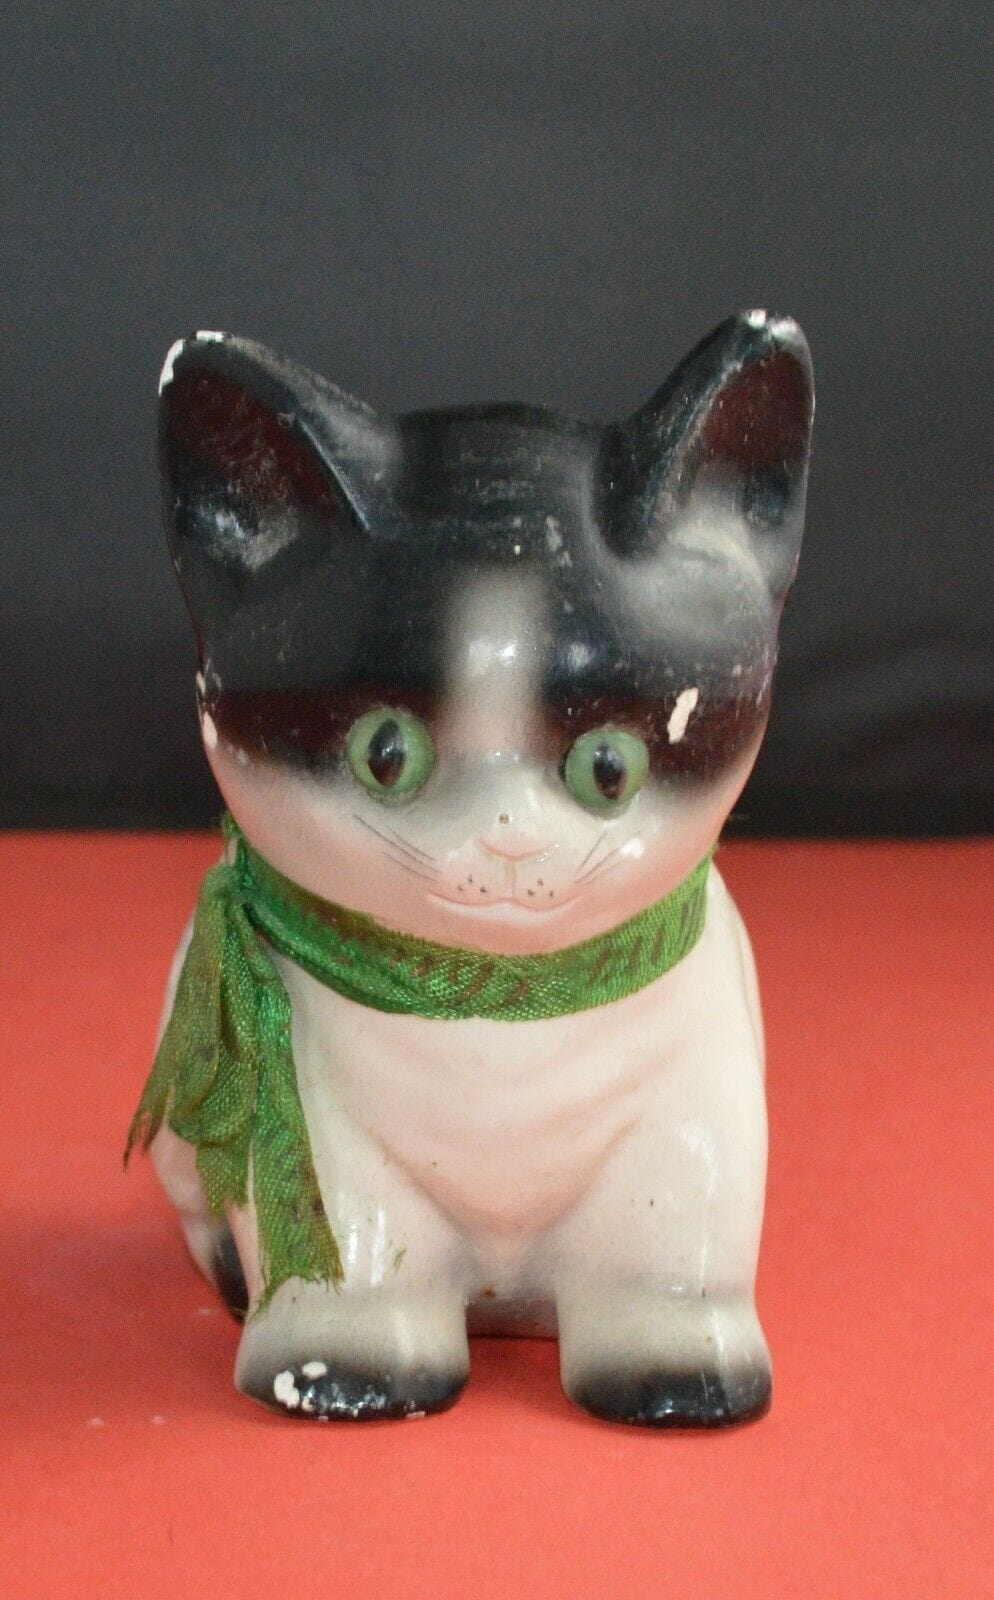 3 DIFFERENT CUTE CAT FIGURINES - TMD167207